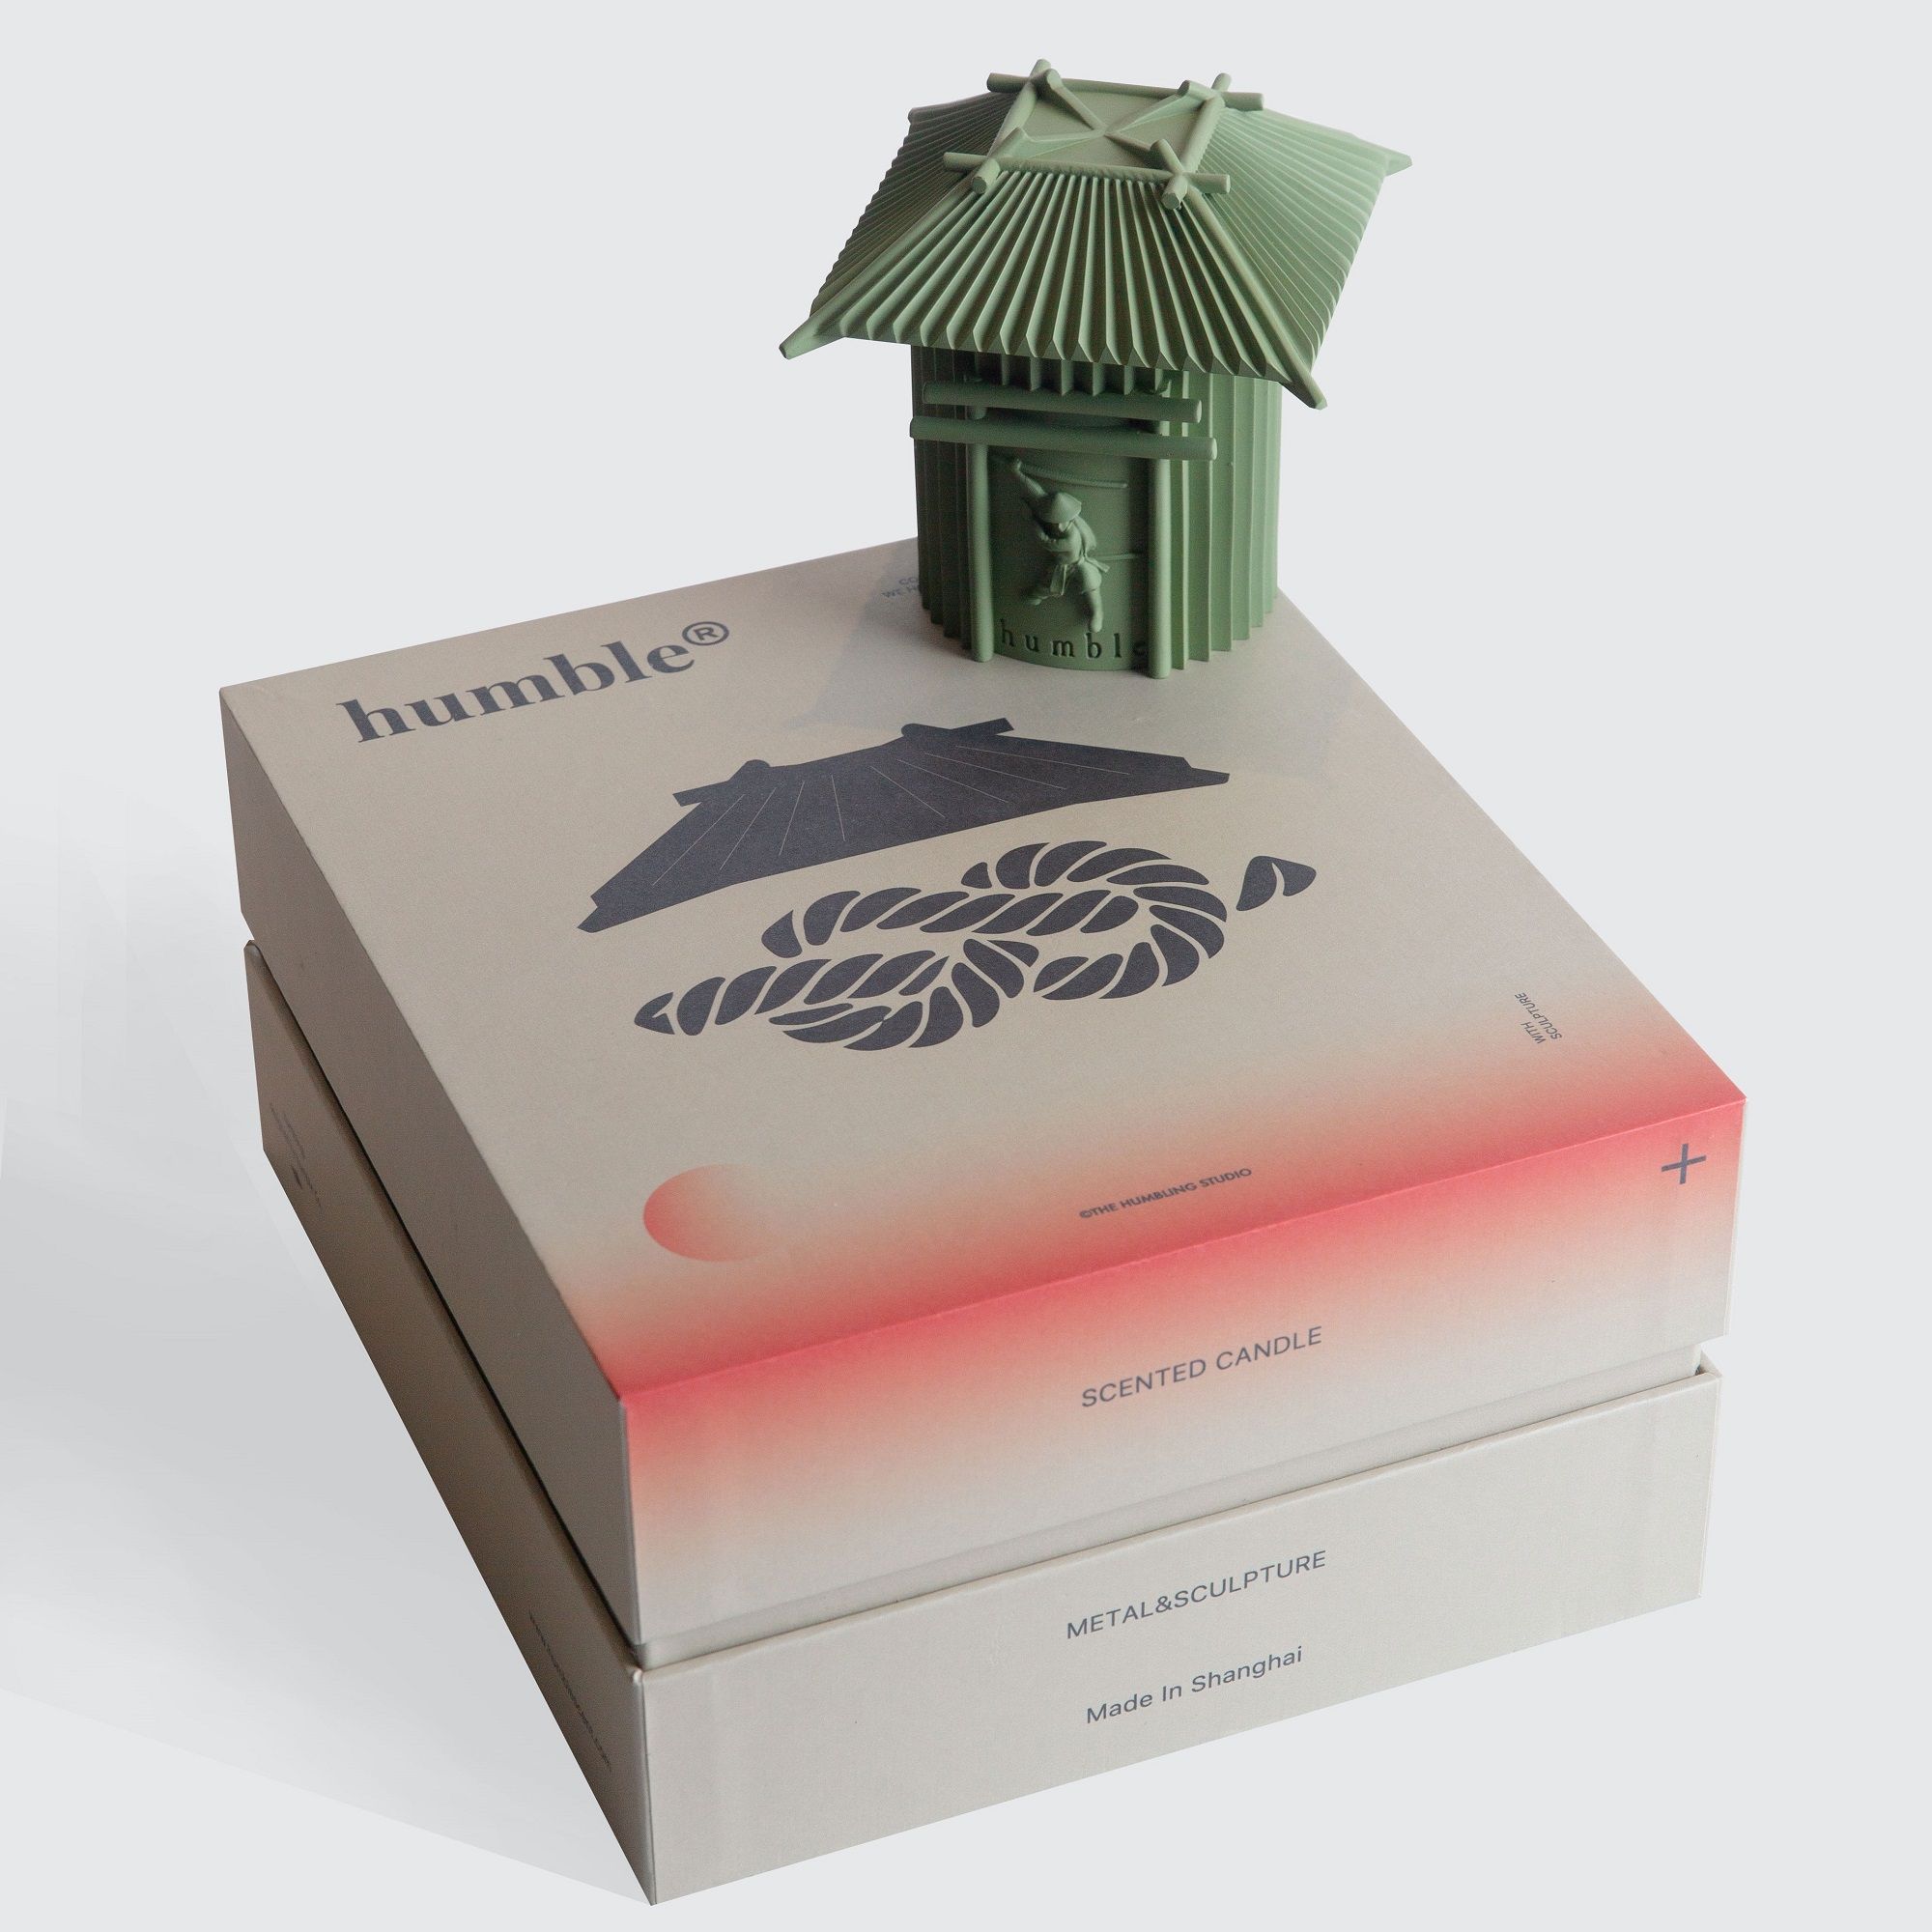 Humble Candle Gift Box - Voice of Nature